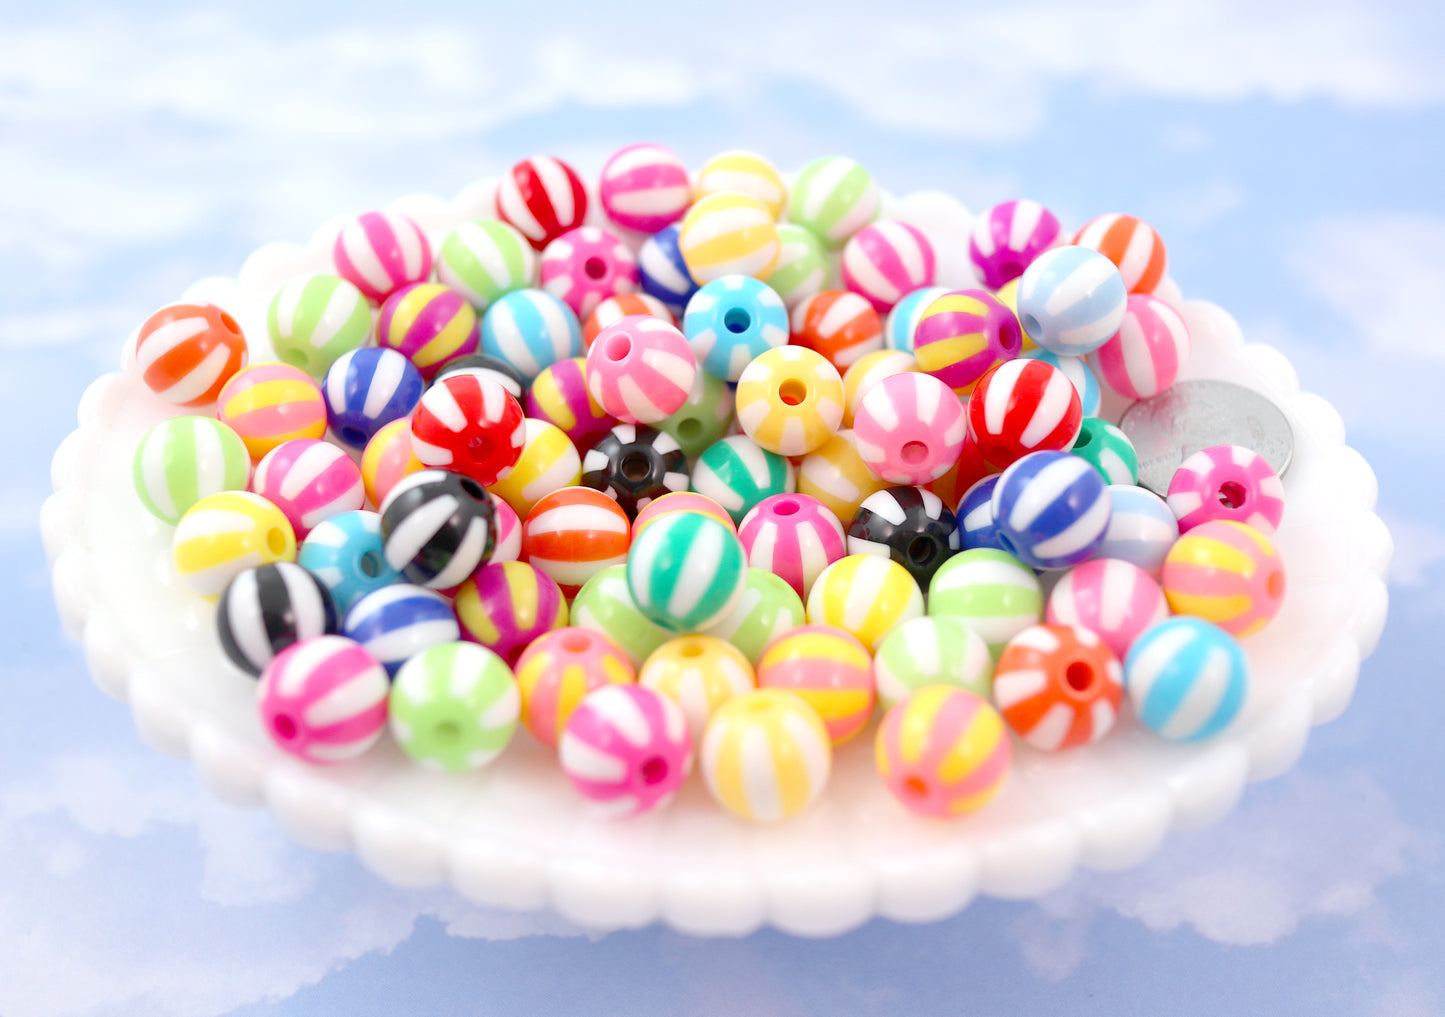 Striped Beads - 12mm Beach Ball Stripe Color Mix Round Resin Beads - 25 pc set